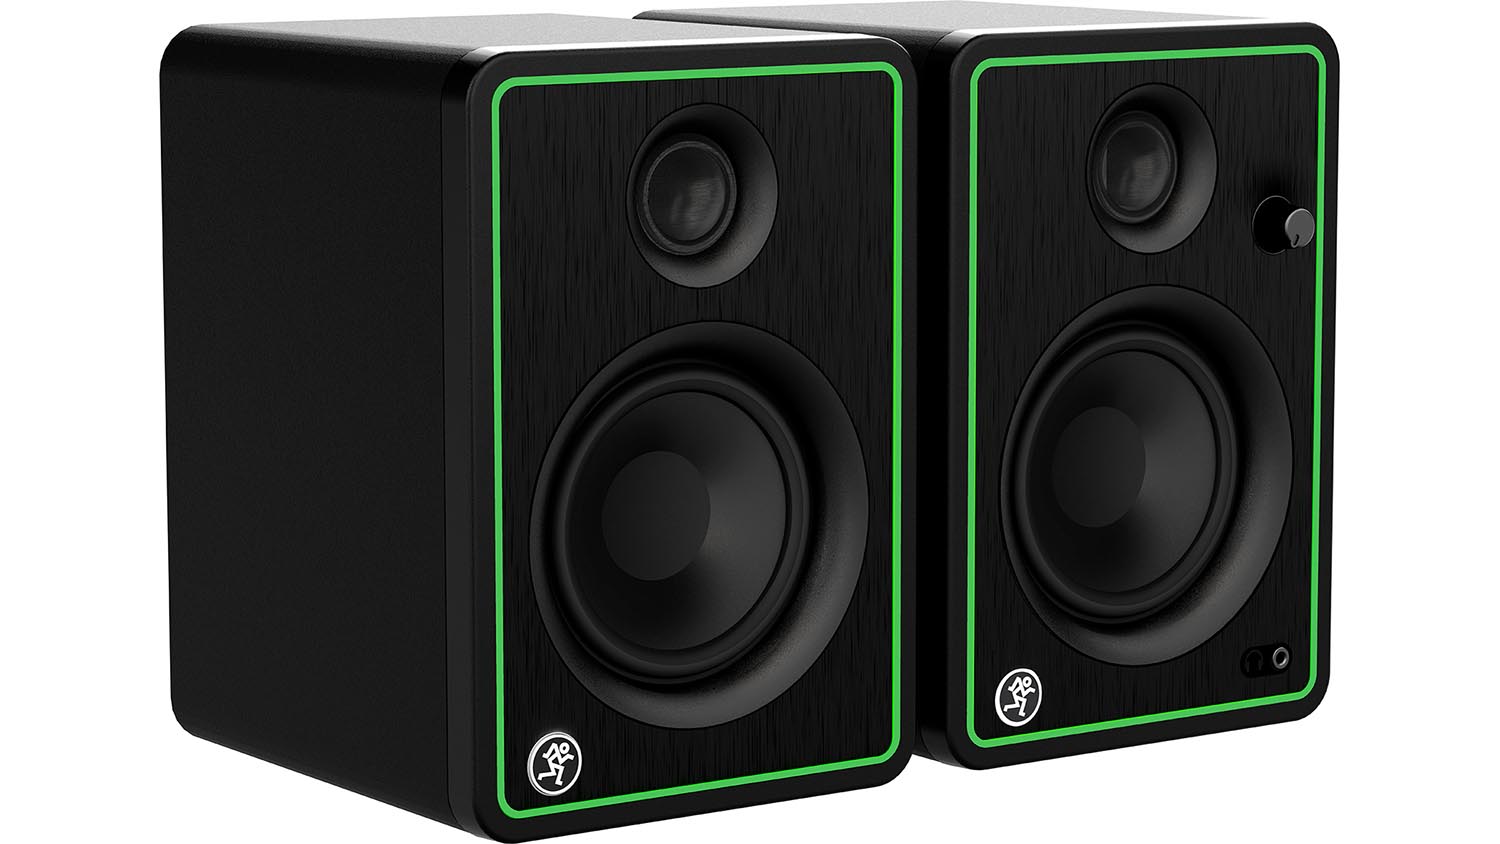 Mackie CR4-X, 4 Inches Creative Reference Multimedia Monitors - Pair Mackie